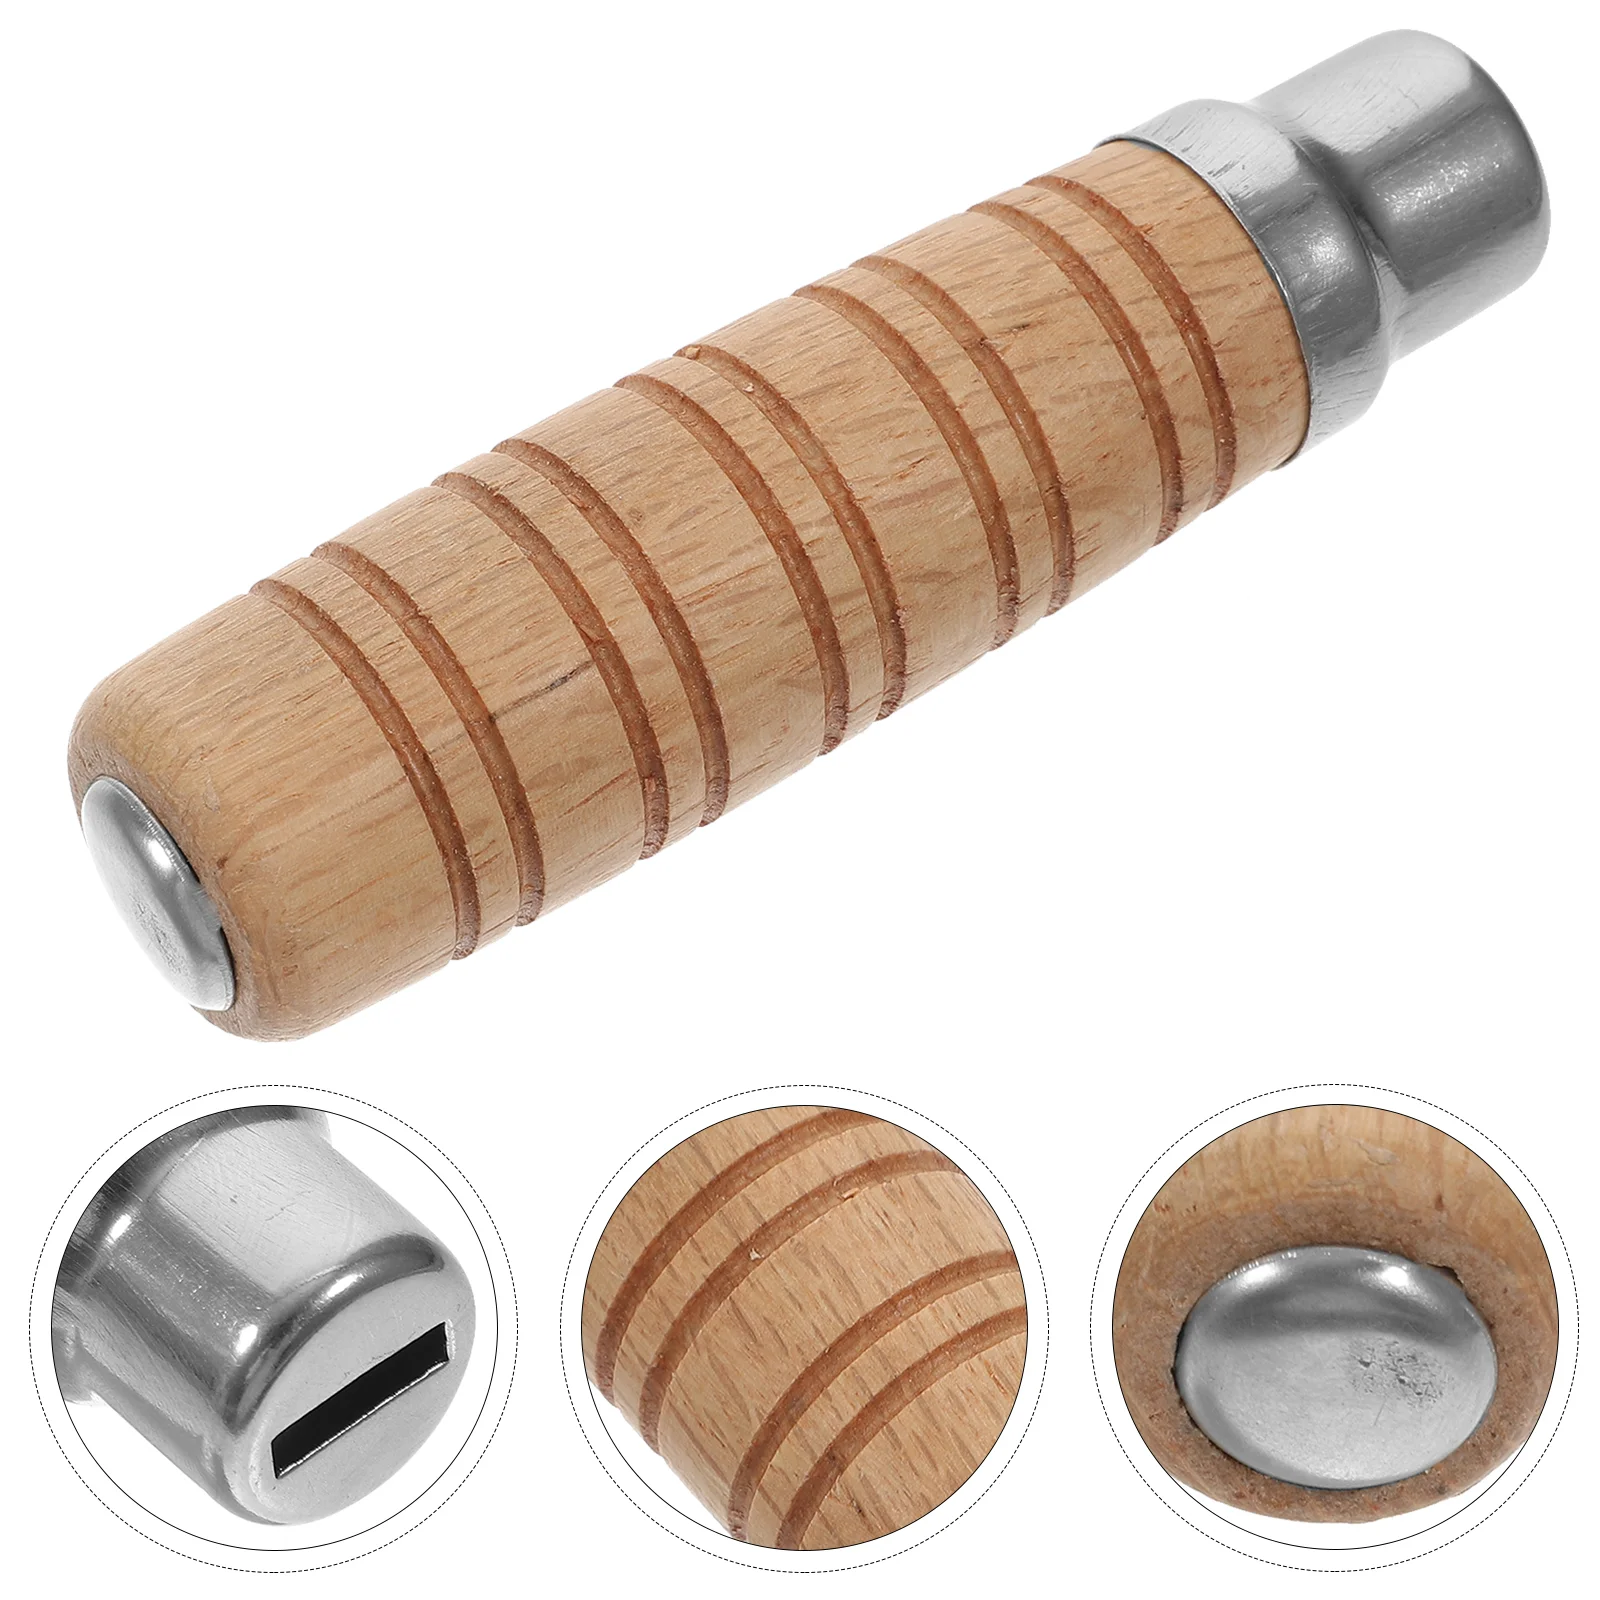 

Replacement Grips for Knife Handles Chopping Wooden Kitchen Replaceable Non-skid Chef